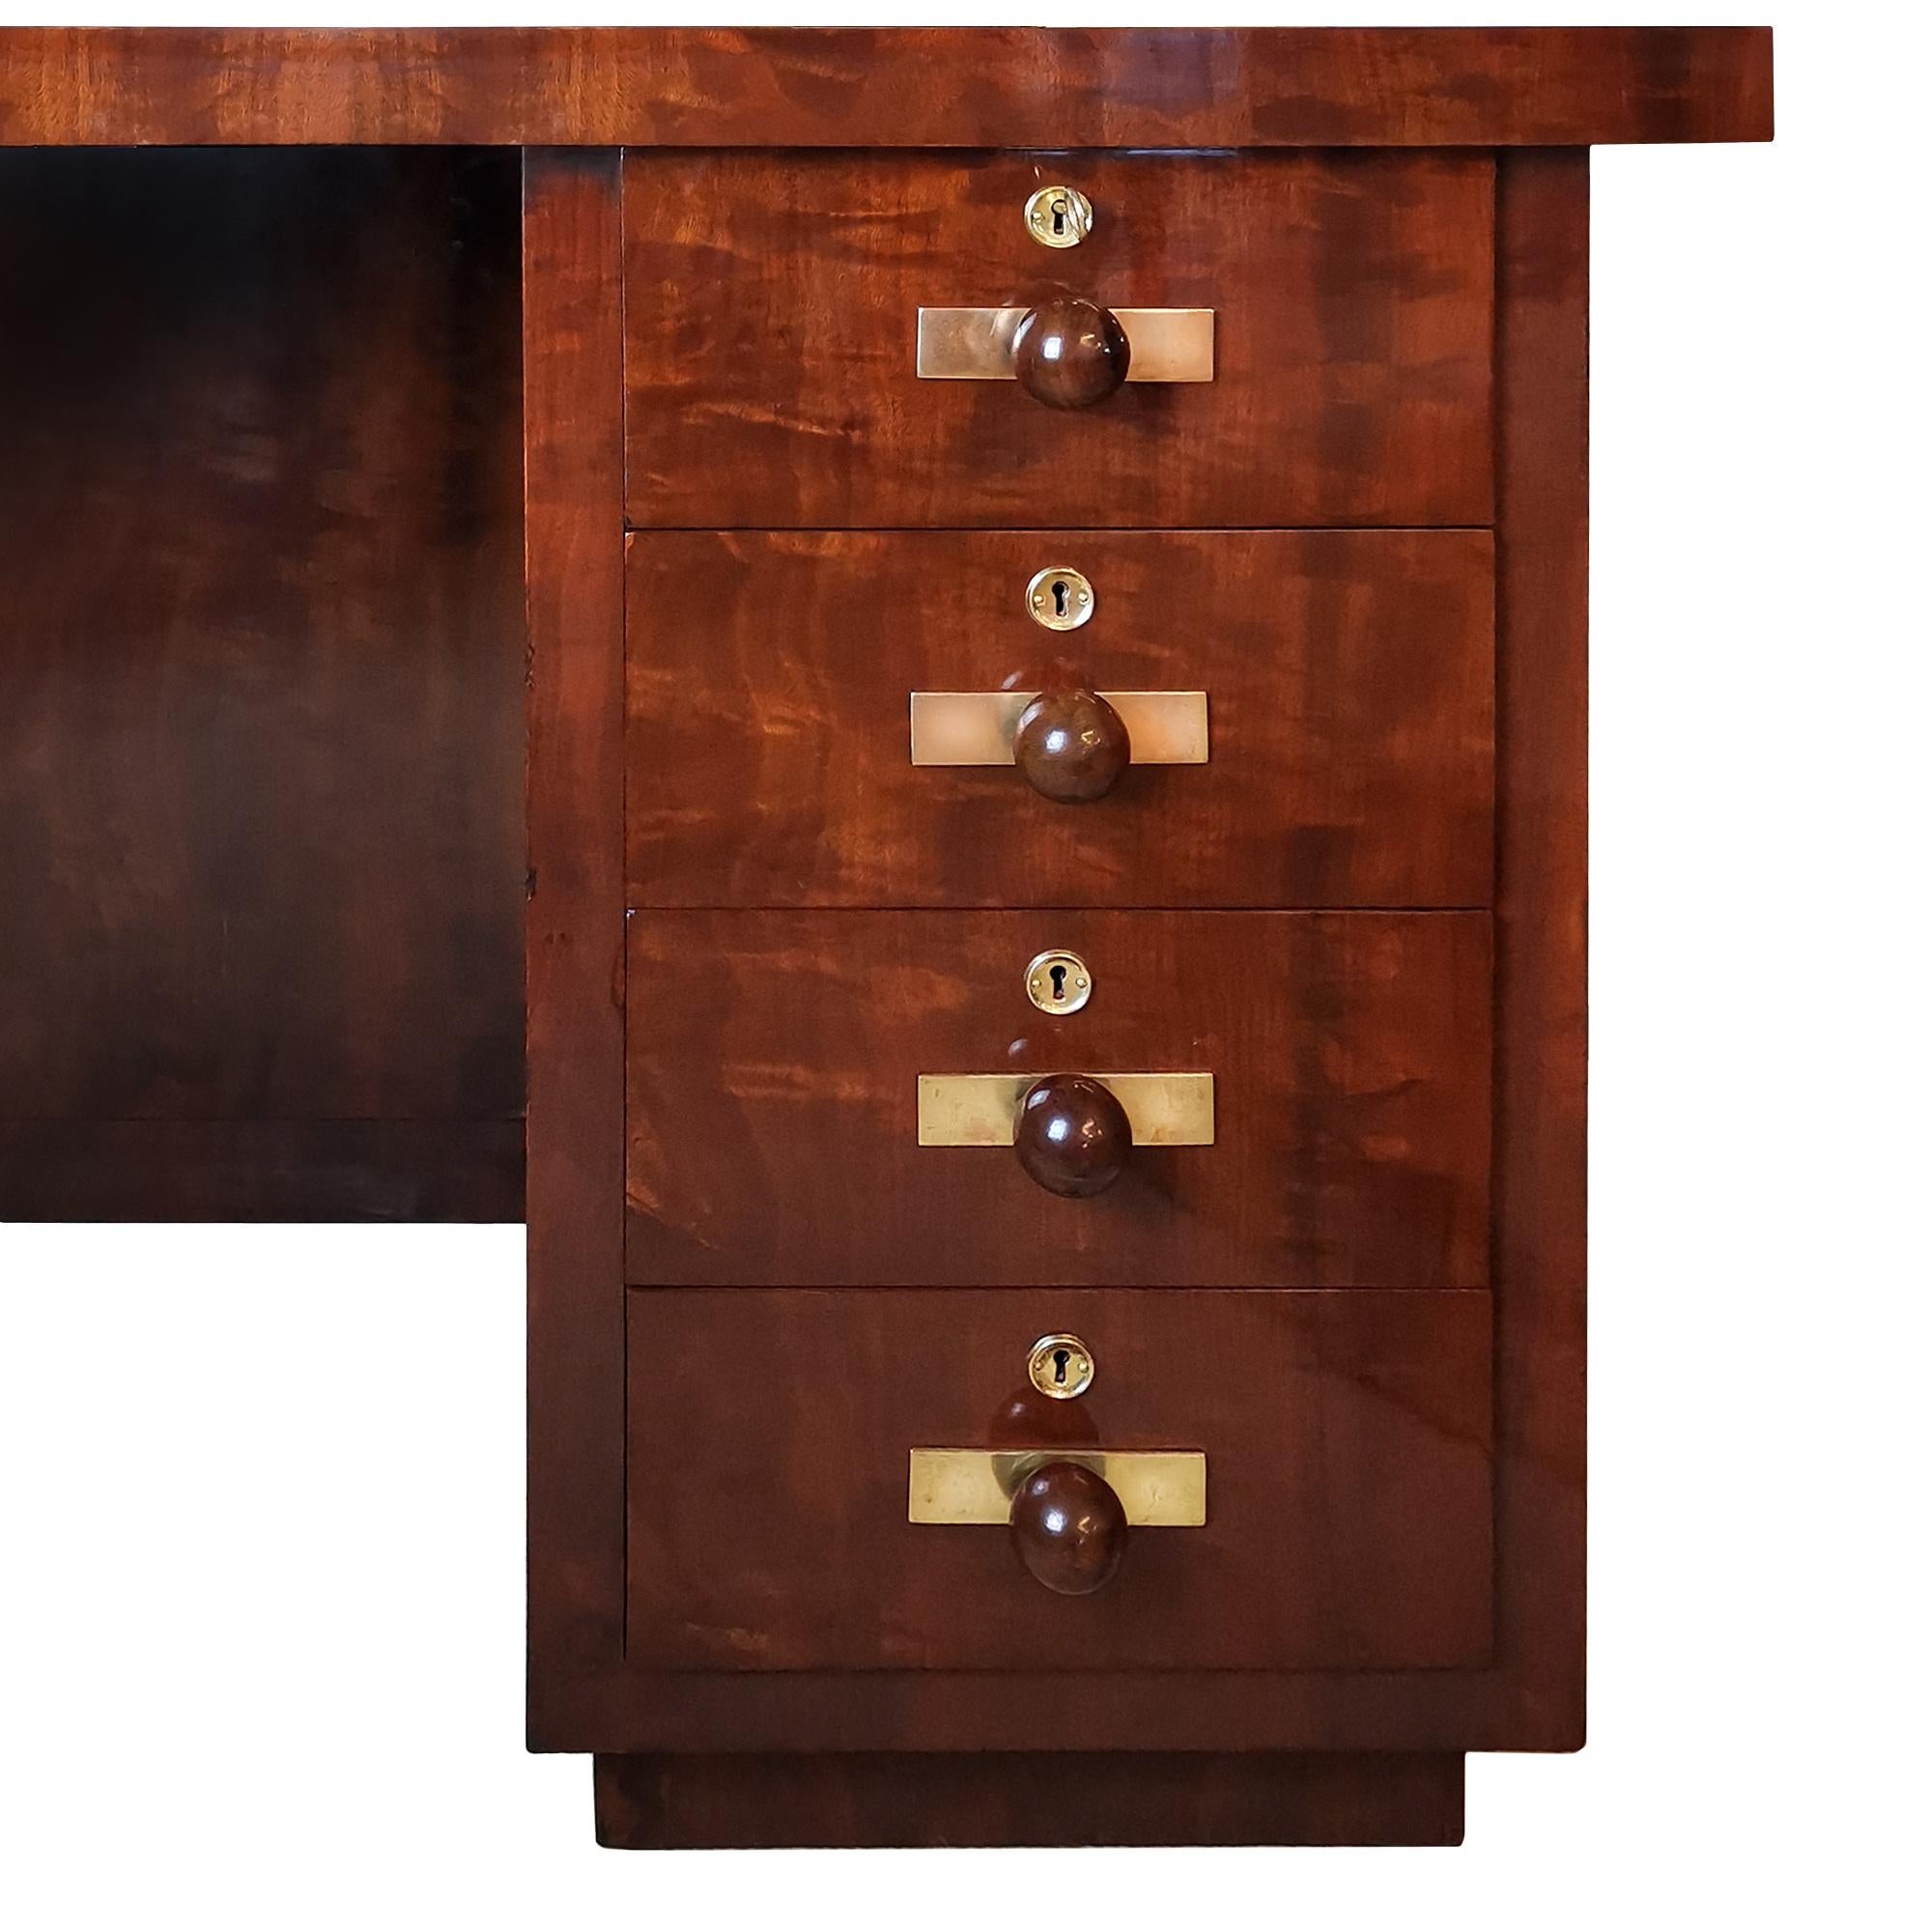 Cubist Art Deco desk with flame mahogany veneer. Six drawers and a door opening on the front, a niche on one side. Mahogany pull handles, polished brass hardware. French polish. Very high quality.
Matching low bookcase available.
Barcelona c. 1930.